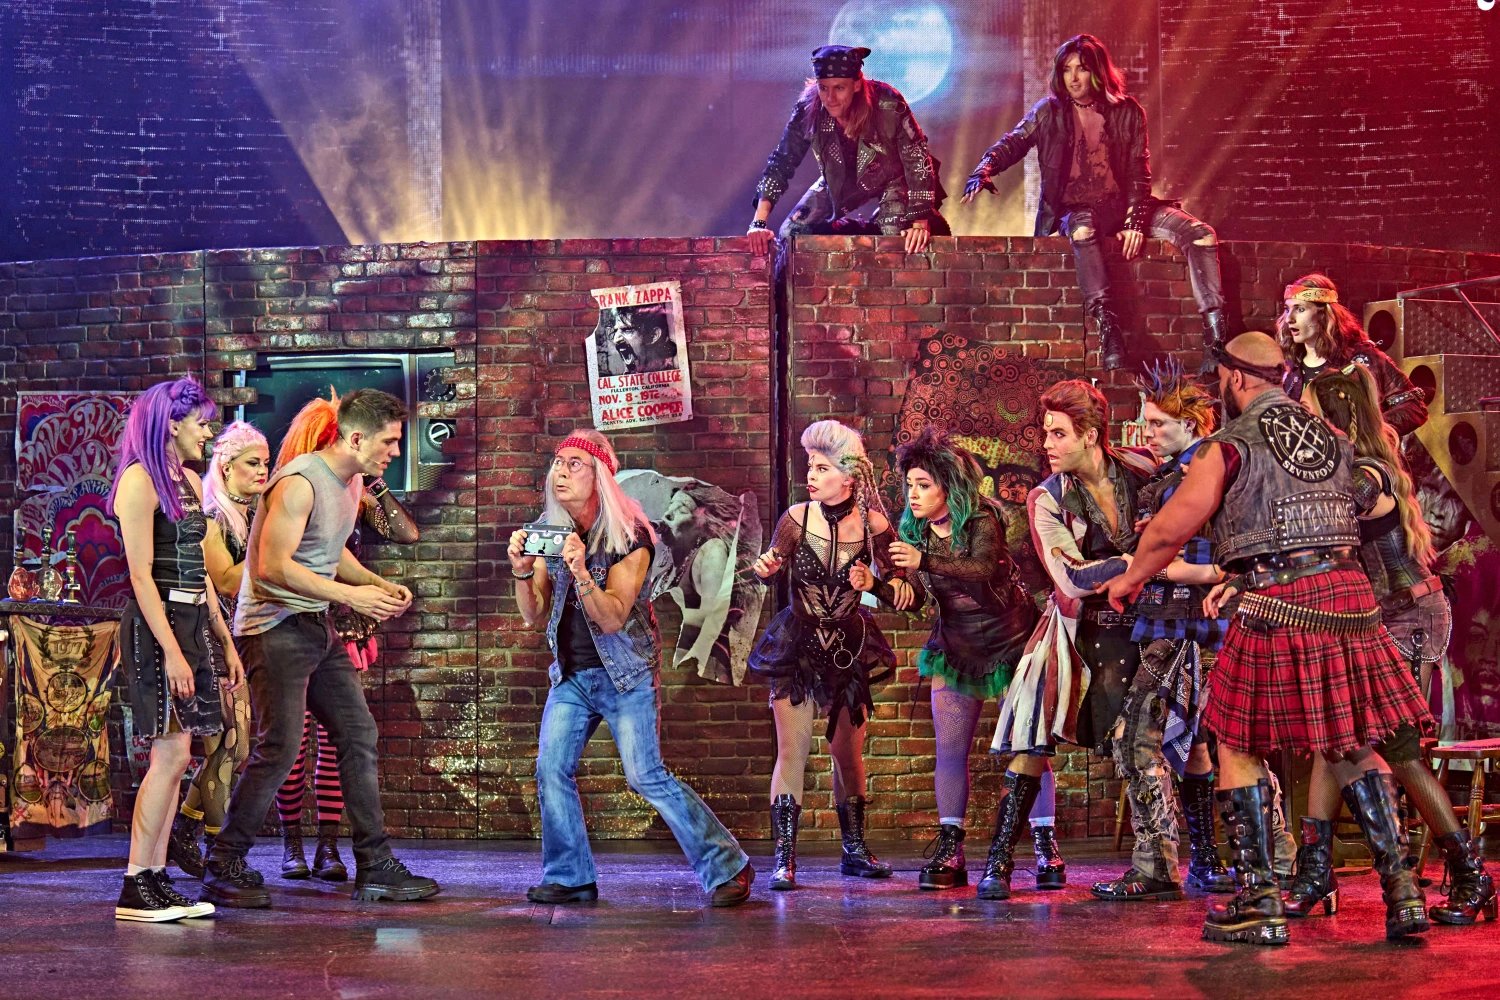 We Will Rock You: What to expect - 5